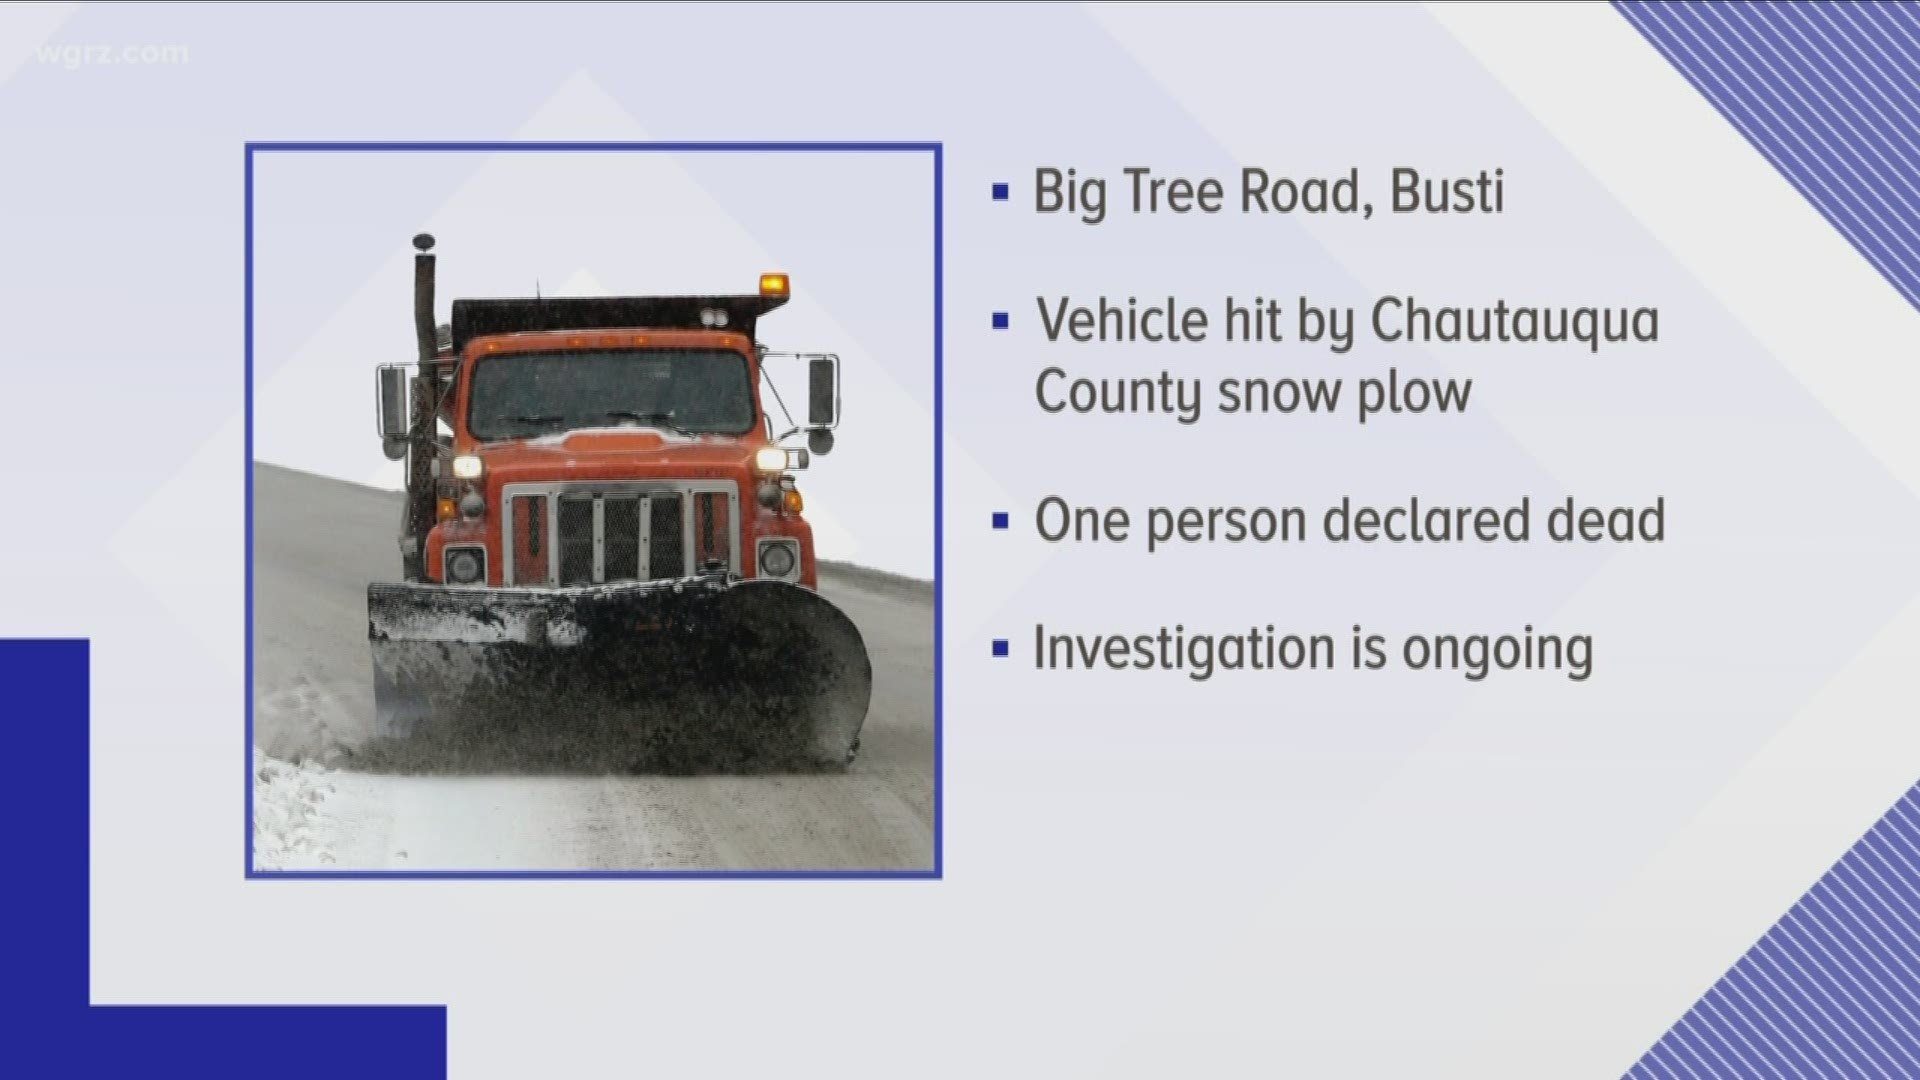 Lakewood-Busti police say one person is dead after being hit by a snow plow. Police say a vehicle was hit by a Chautauqua county plow on Big Tree Road.